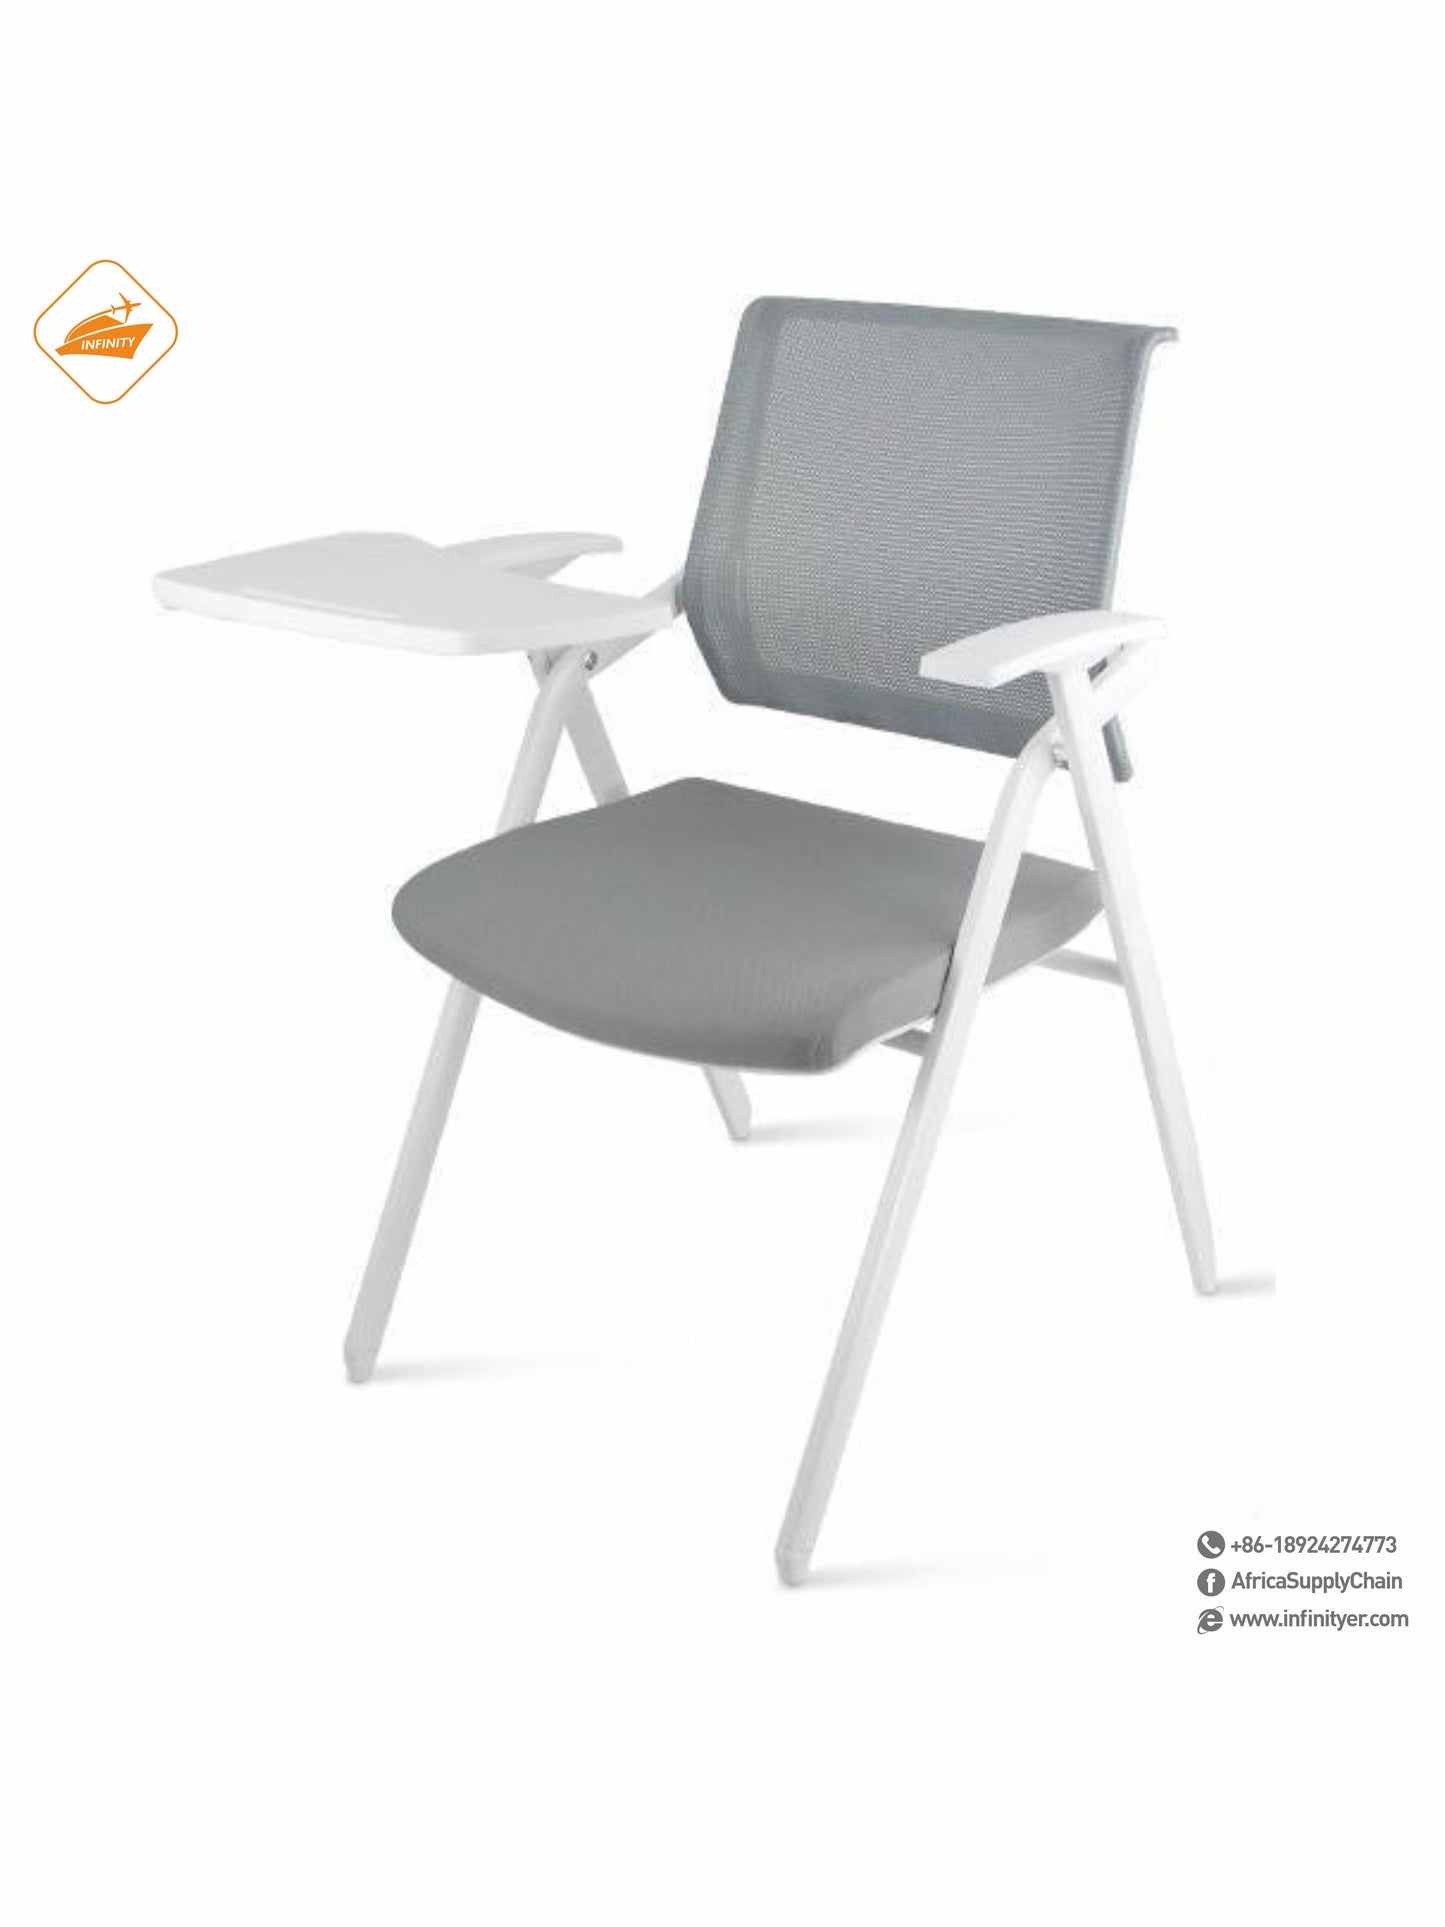 999S-A Meeting Chair with Writing Board